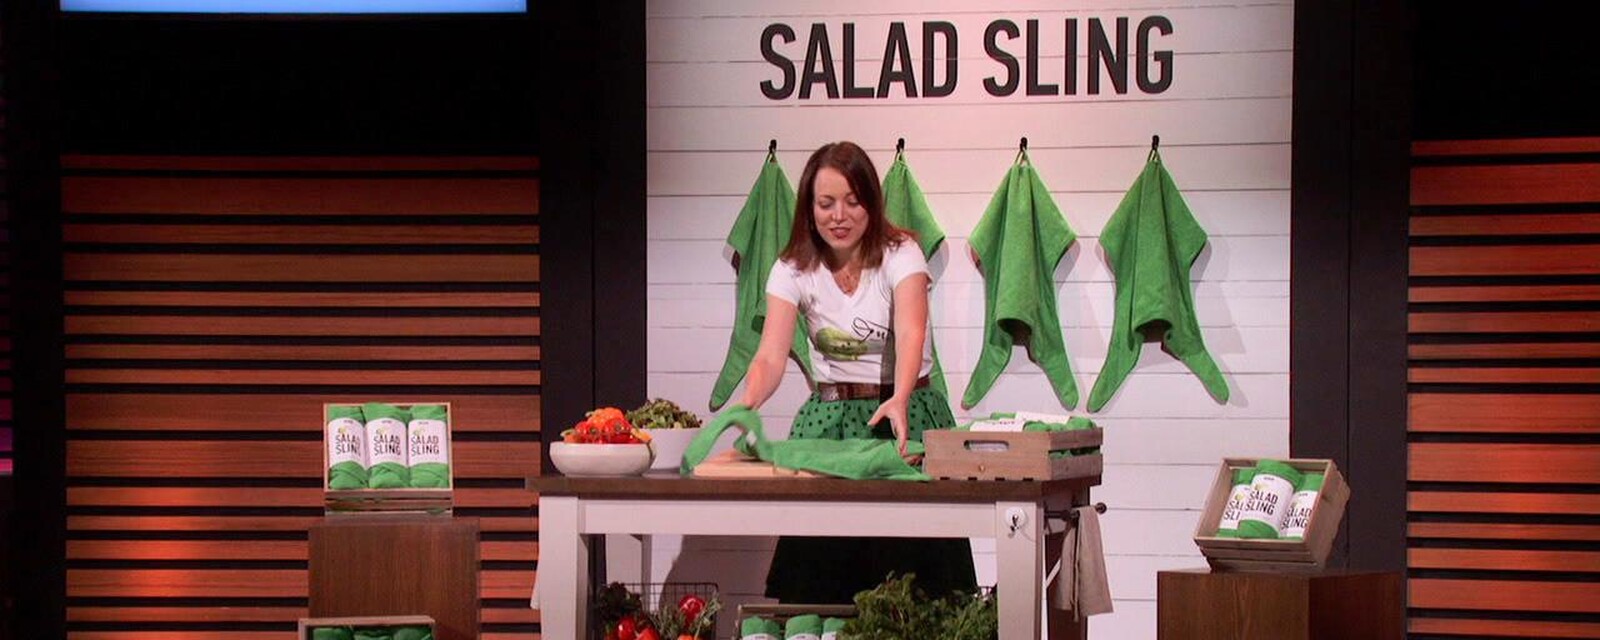 The Businesses and Products from Season 13, Episode 21 of Shark Tank